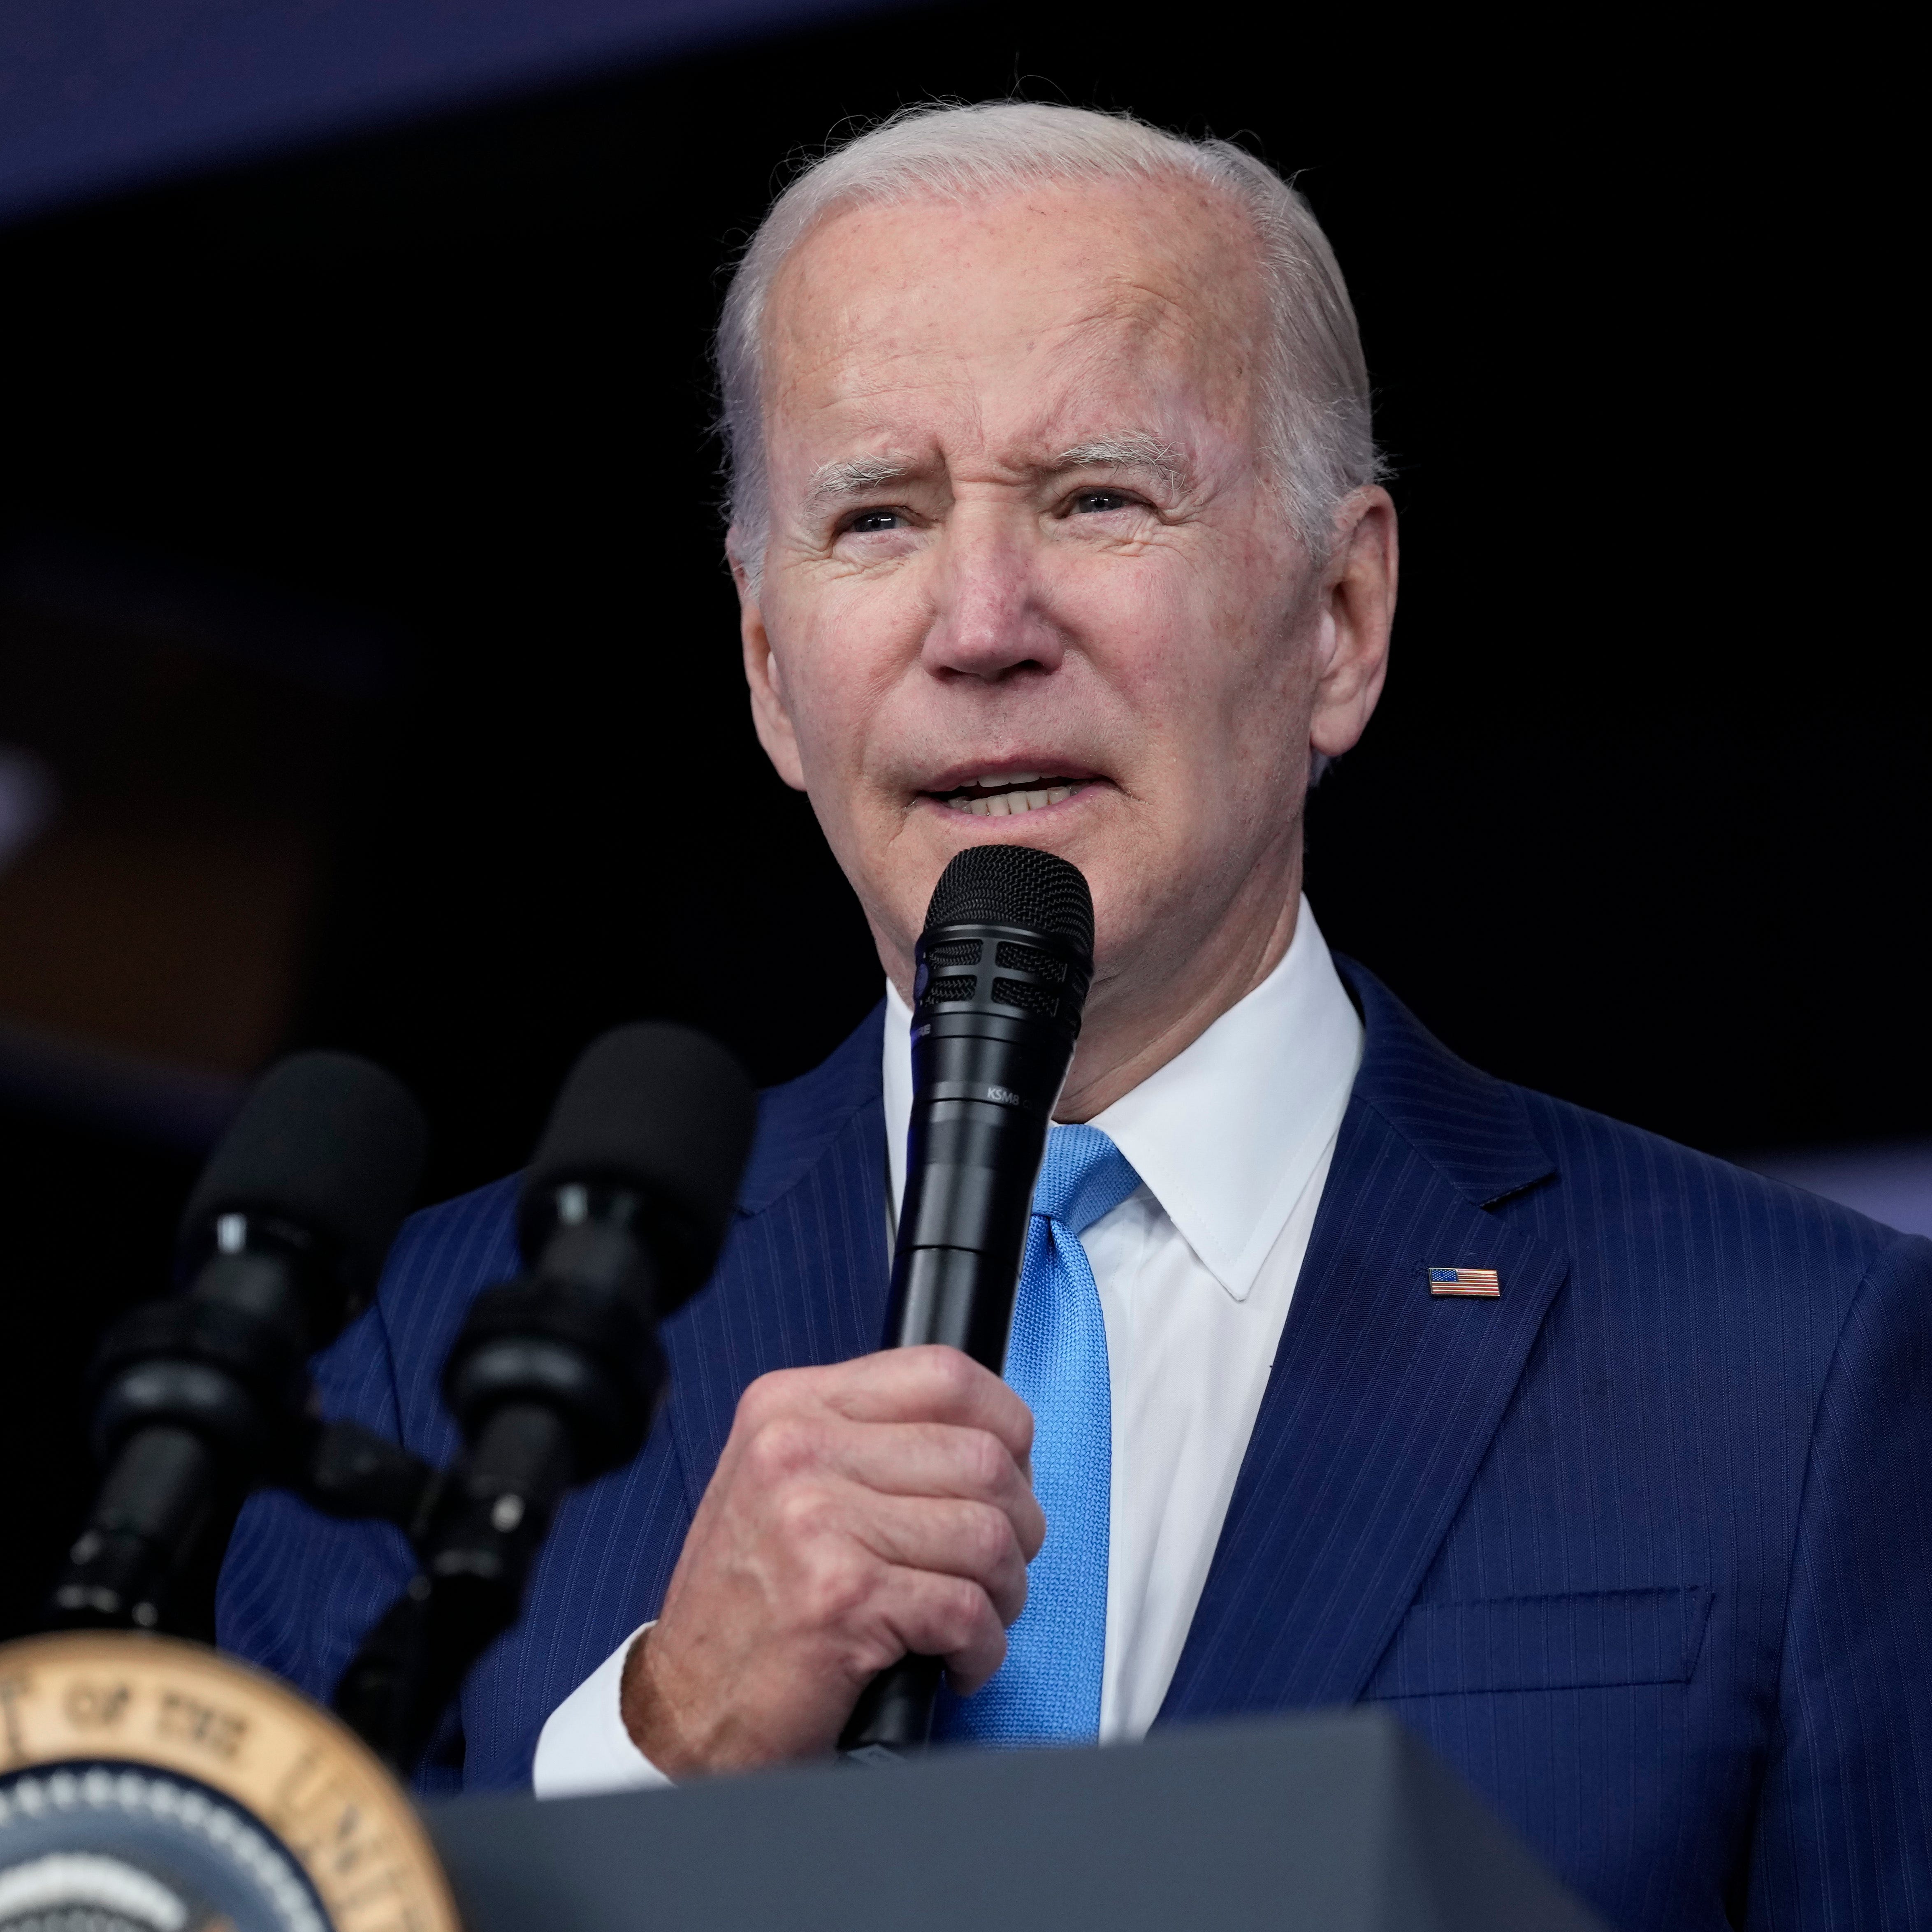 President Joe Biden speaks in the South Court Auditorium on the White House complex in Washington, Dec. 8, 2022. Biden is set to sign legislation into law Tuesday protecting same-sex and interracial marriages.